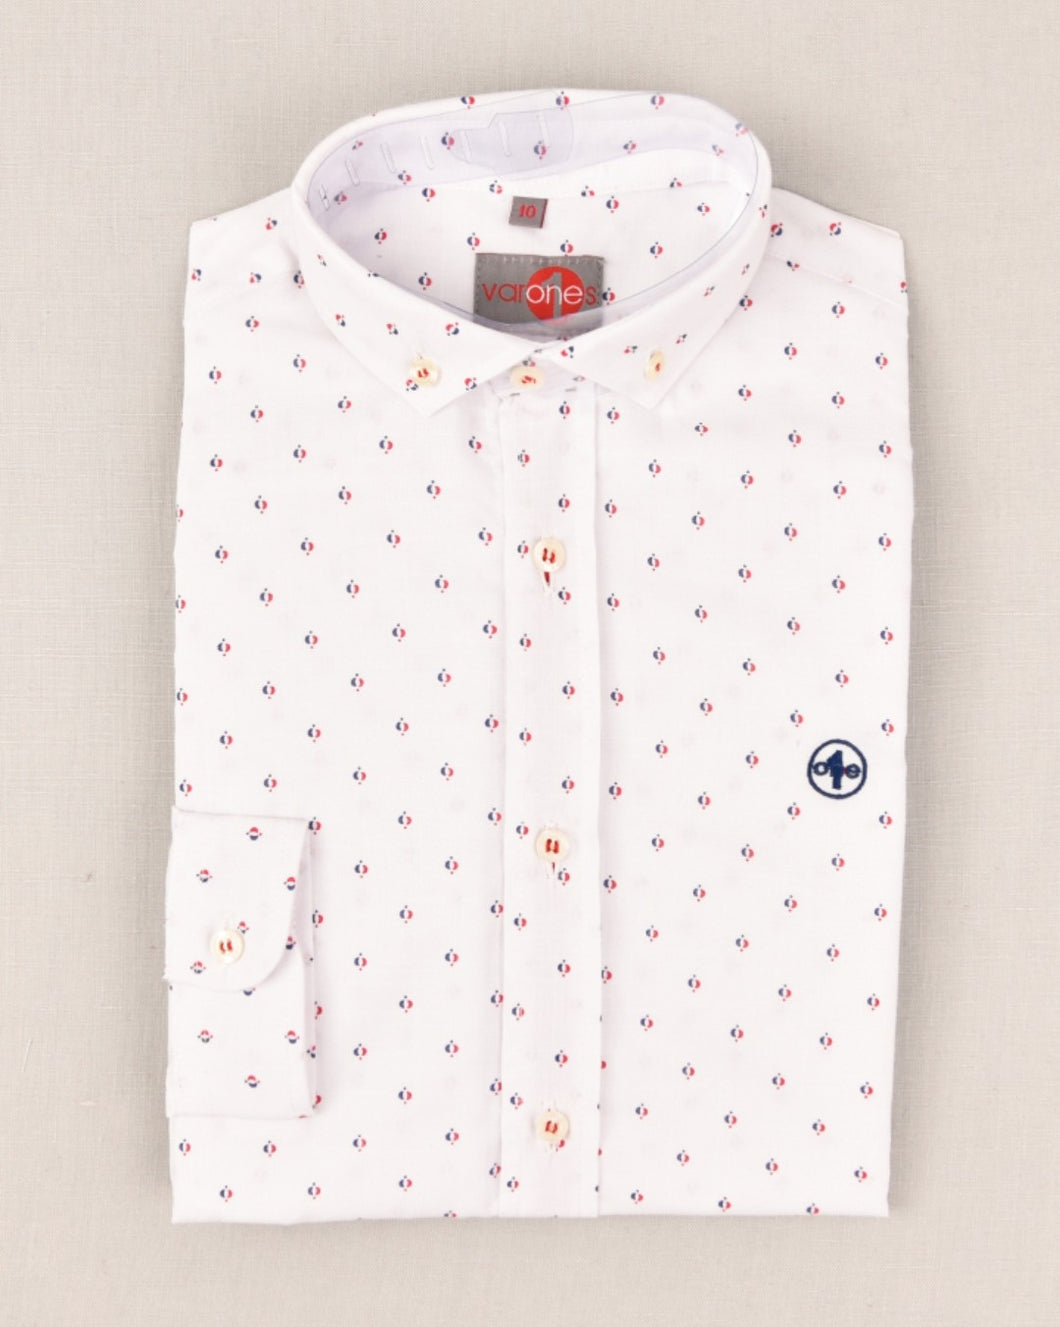 SALE One Varones Boys White Shirt With Navy & Red Print Motif:-10-06113 01